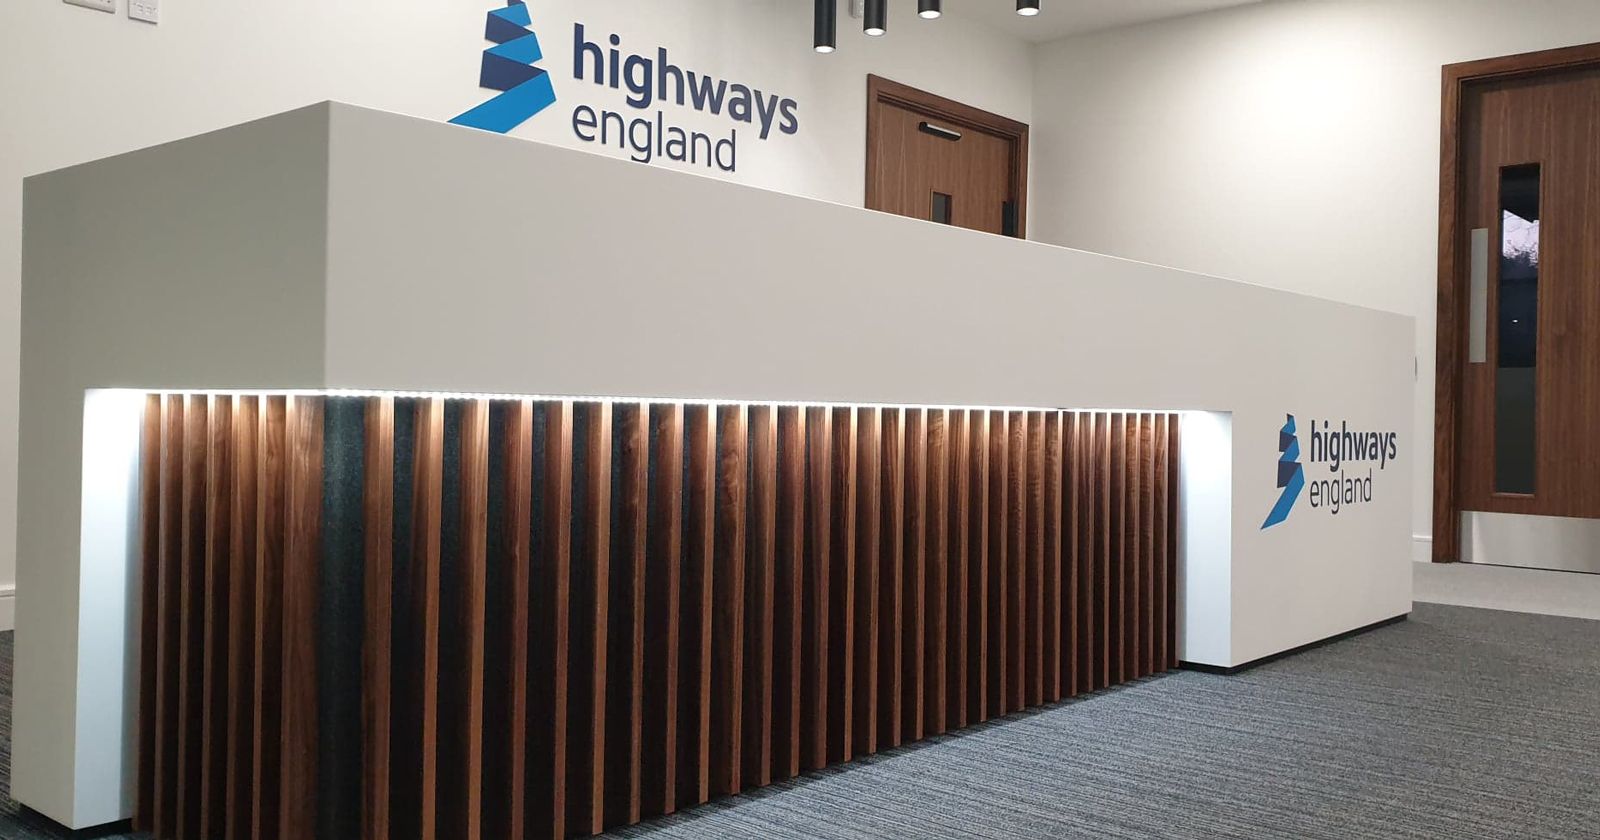 APSS Joinery Designed And Built Highways England feature Reception Desk